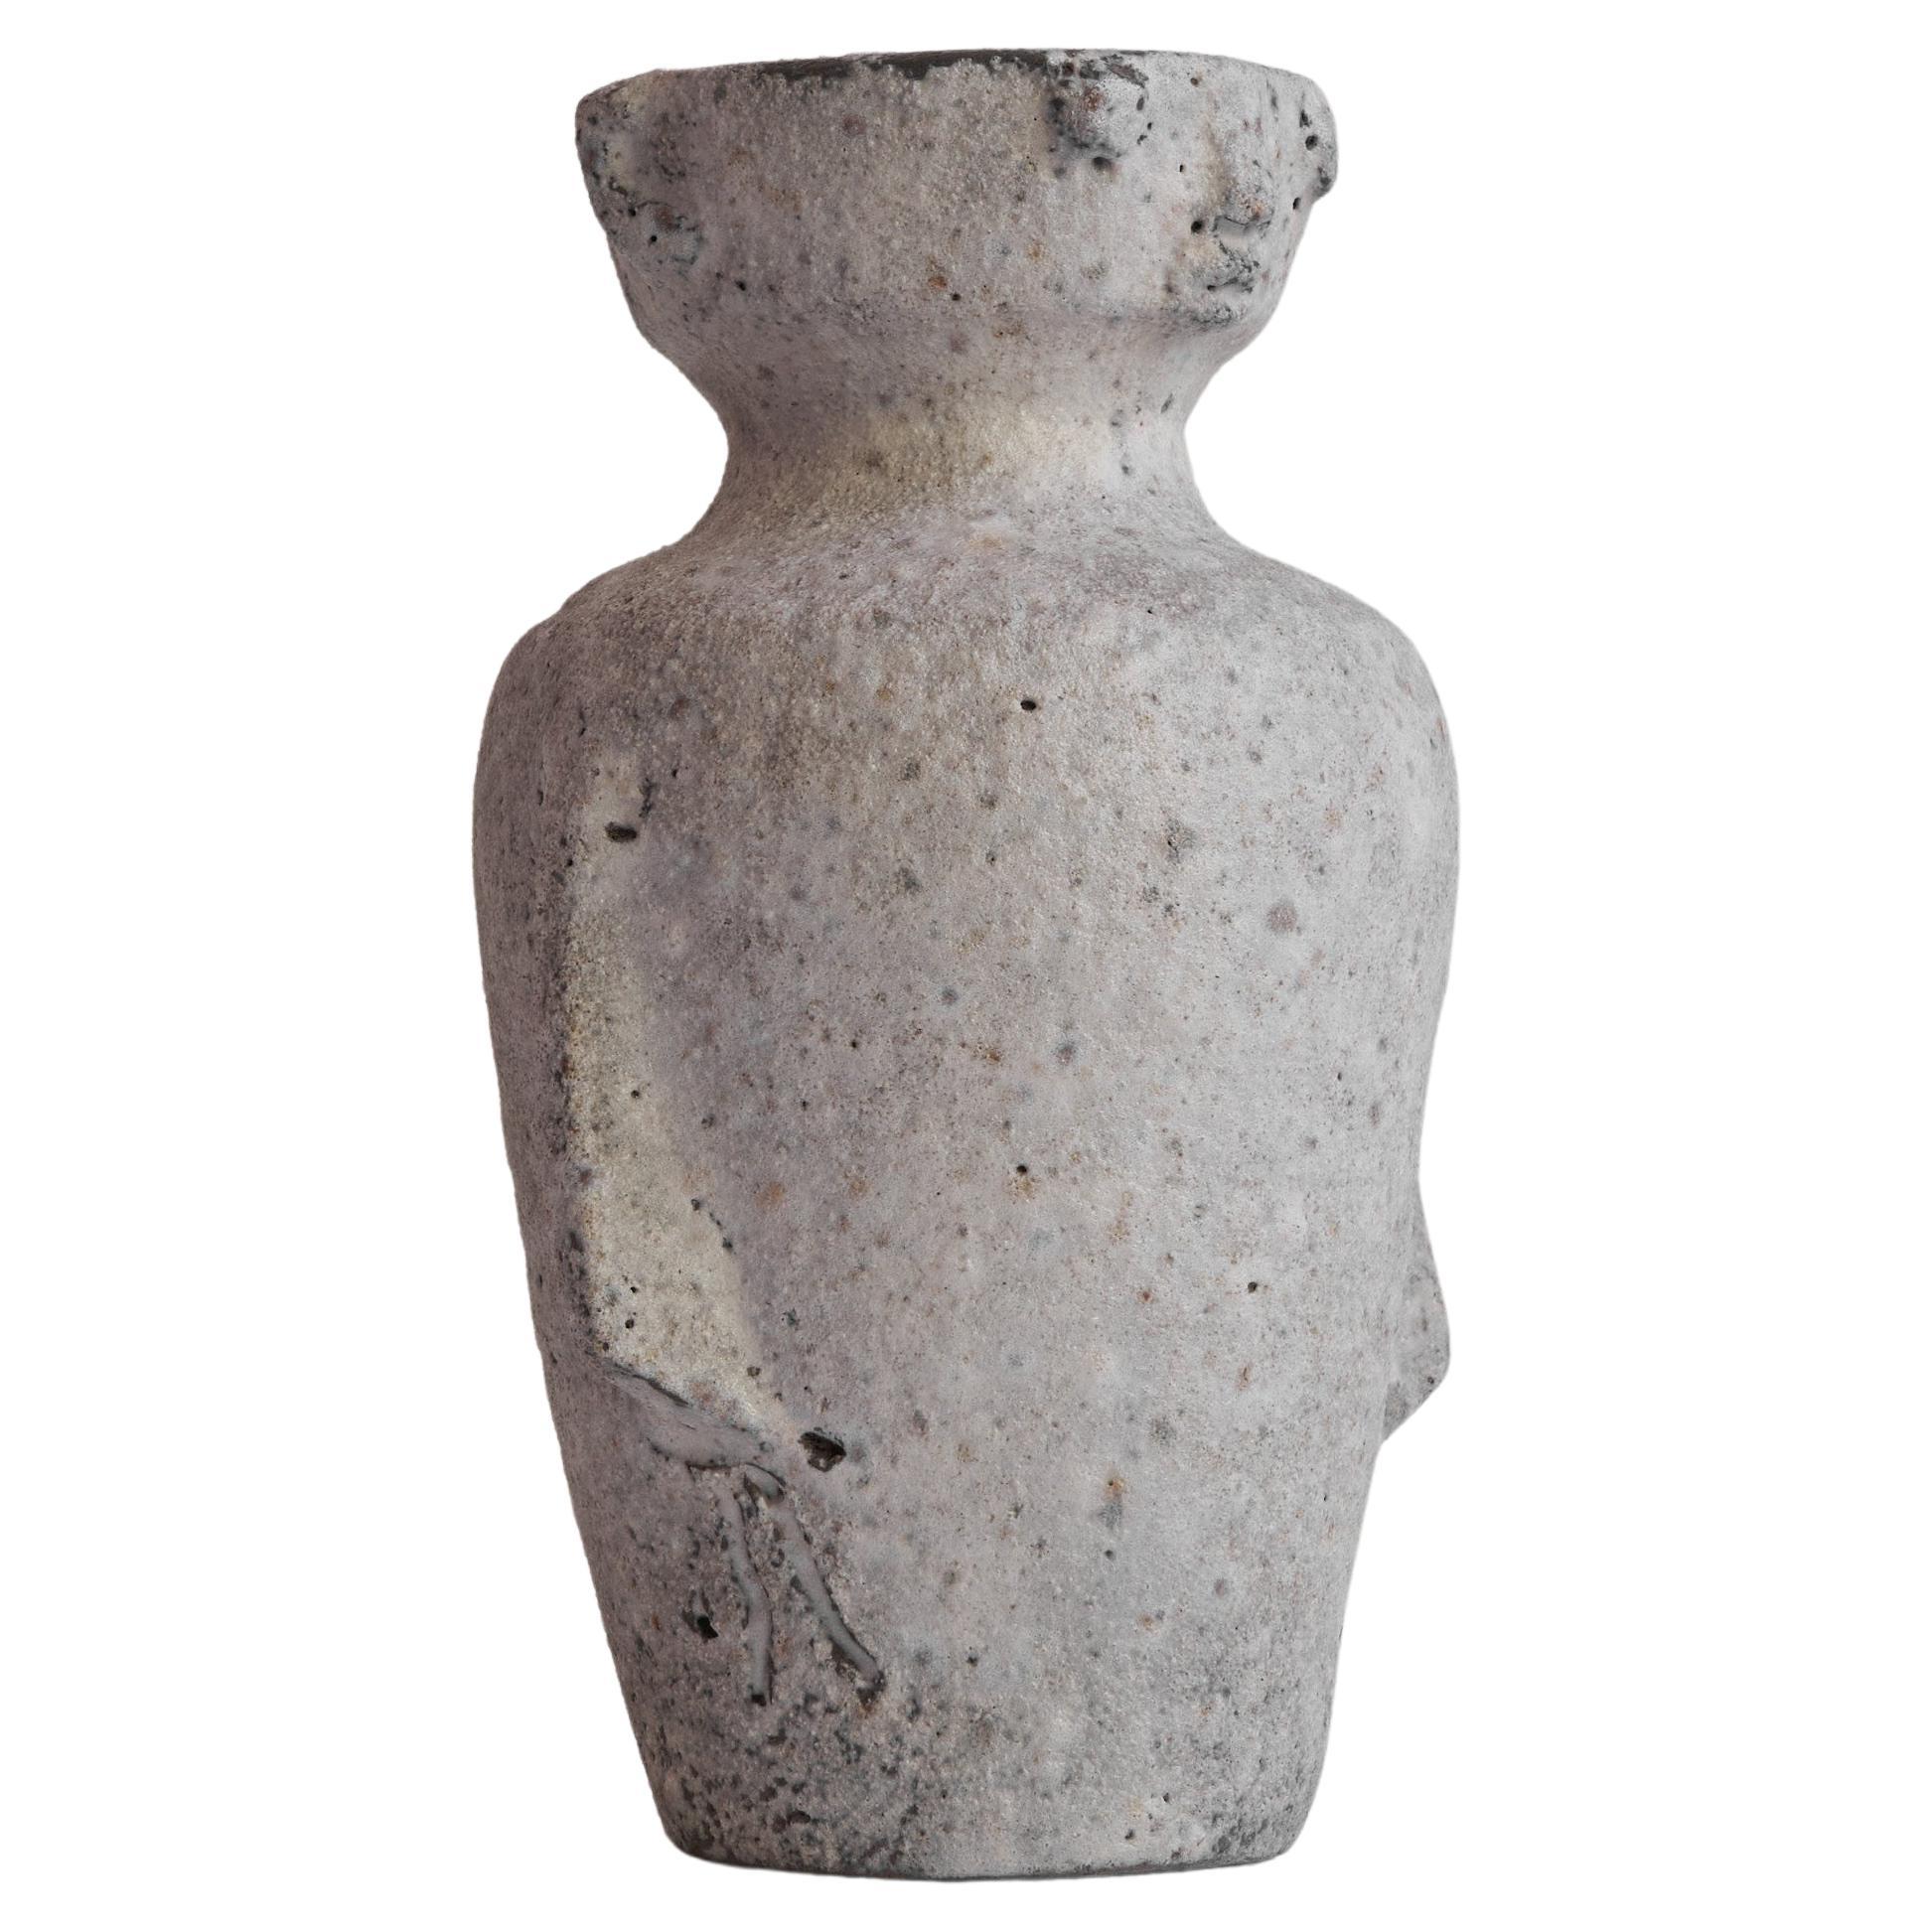 Anthropomorphic Stoneware Vase in the Style of Jacques Pouchain 1950s